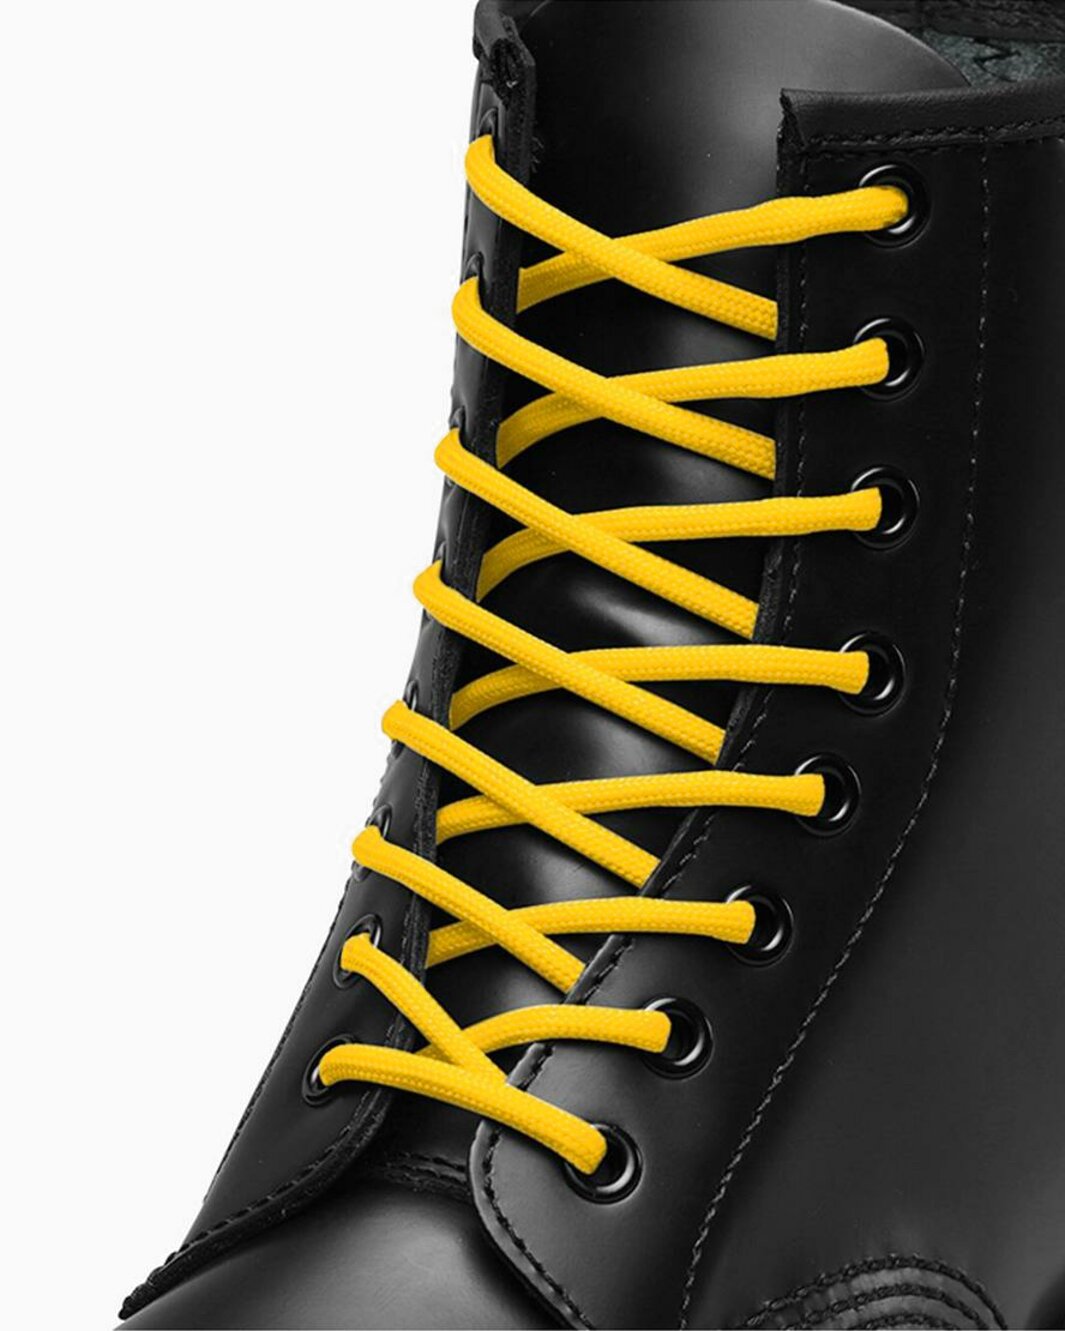 Second hand Dr Marten Boot Laces in 